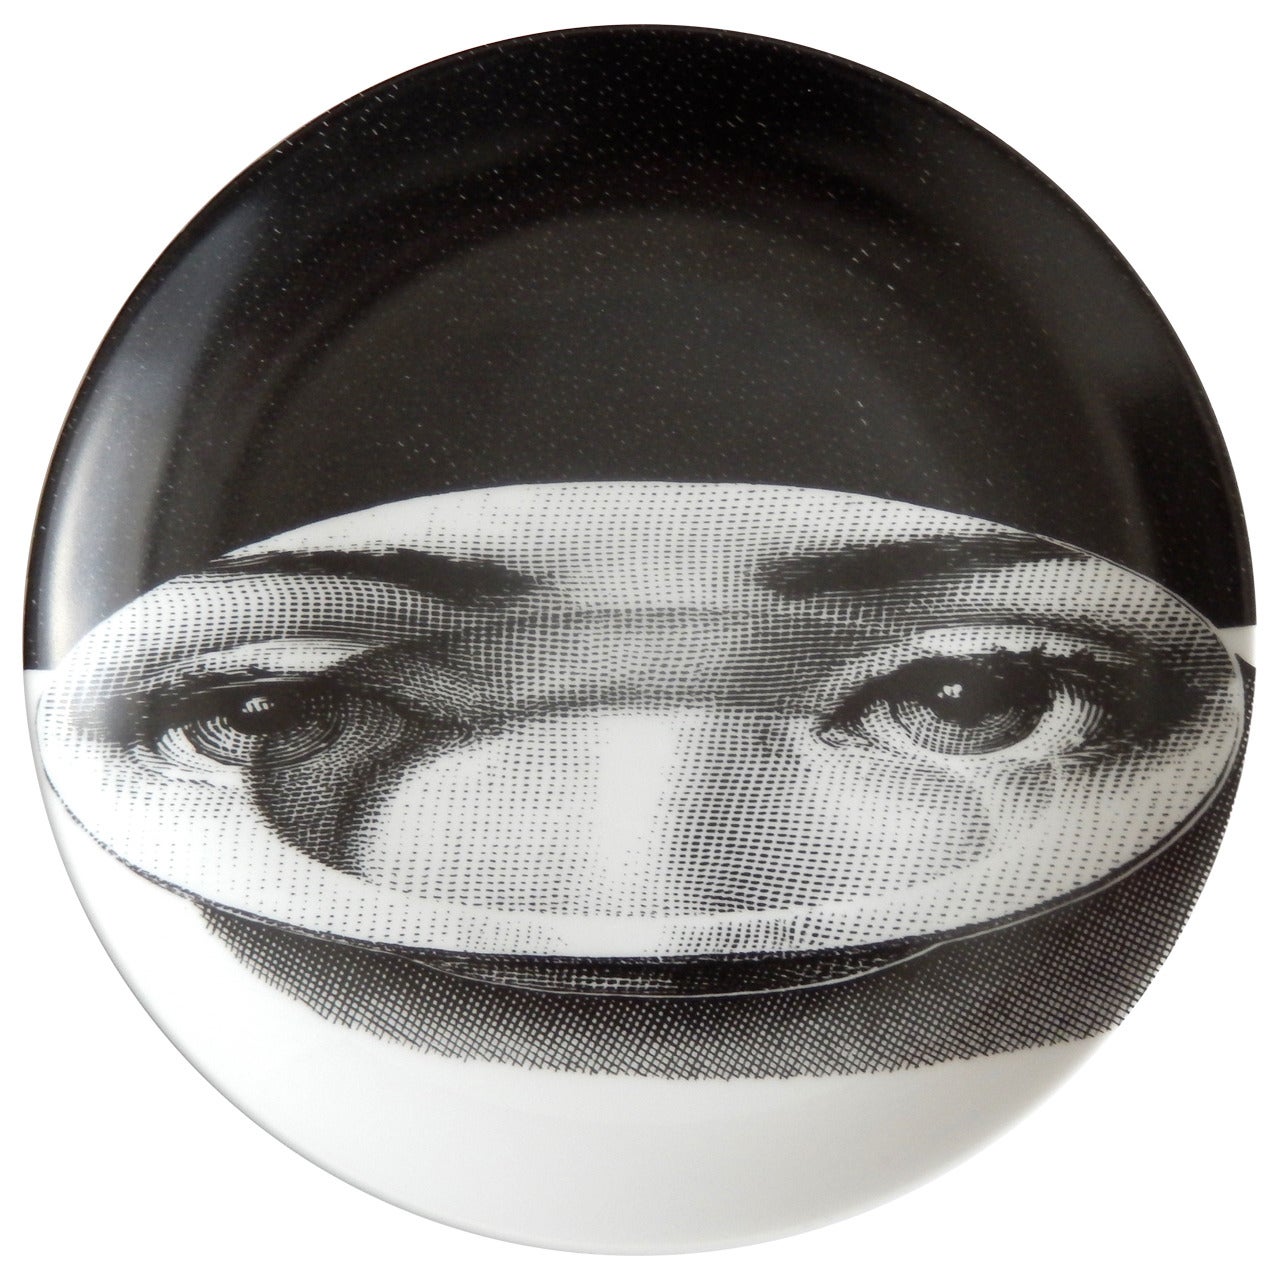 Vintage Plate by Piero Fornasetti, 1960s